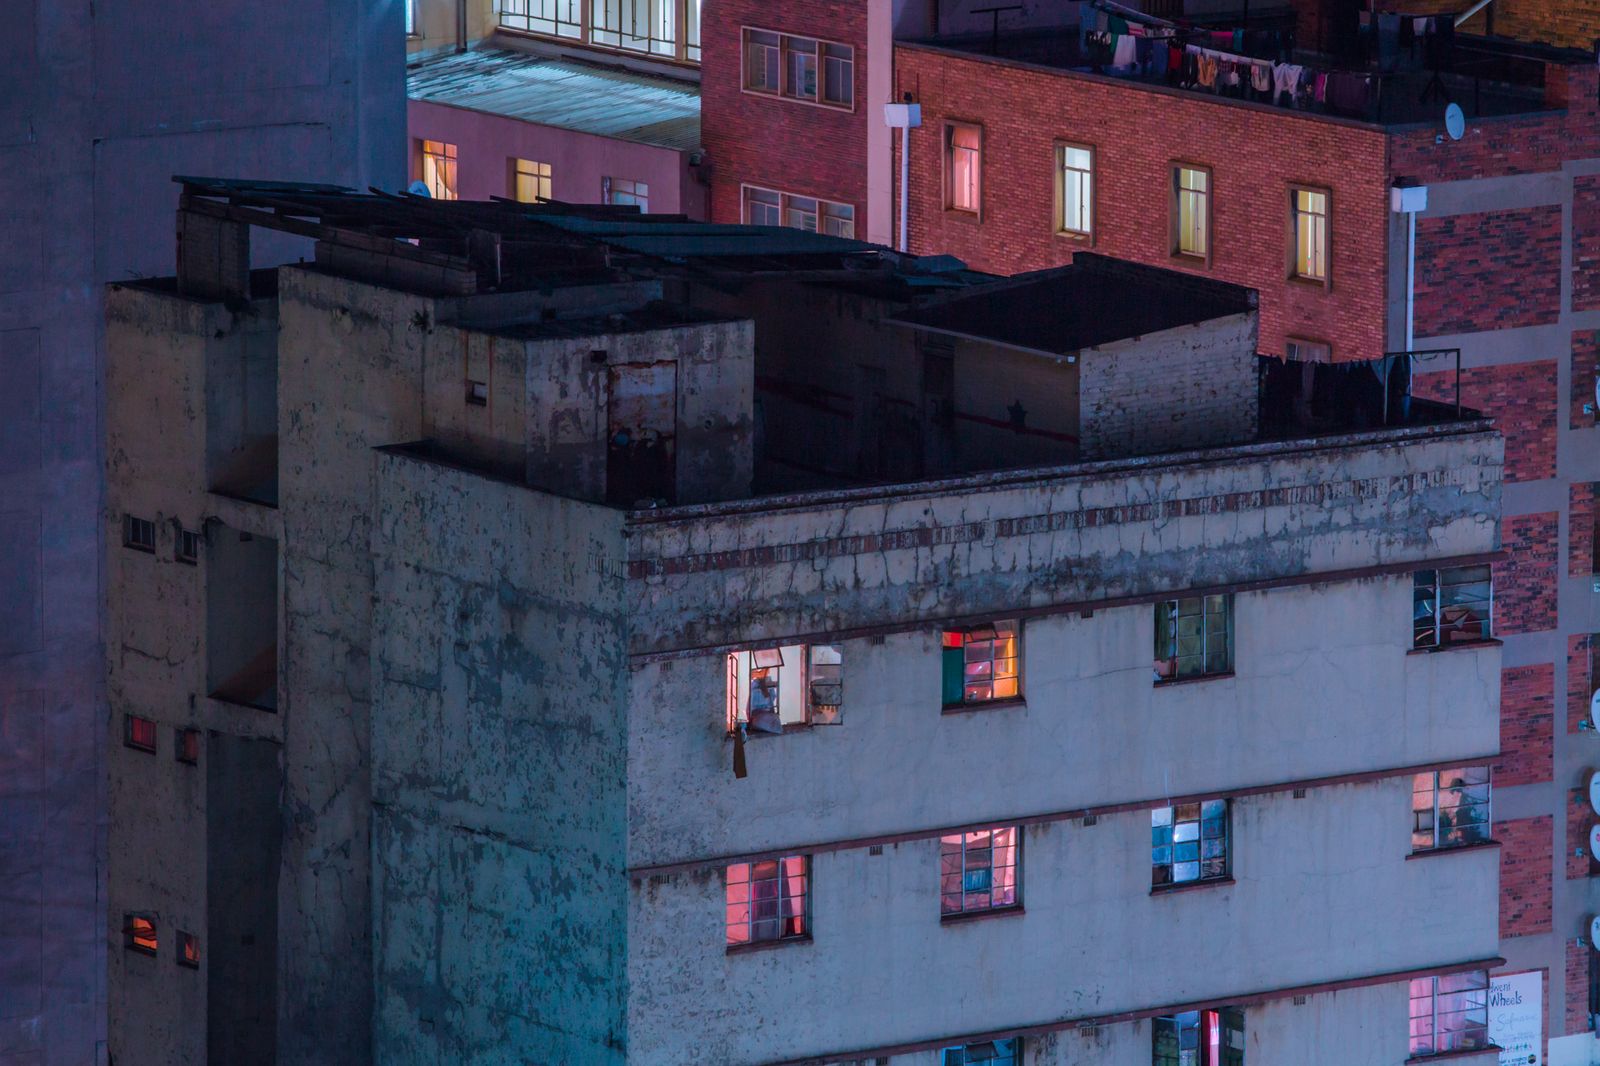 © Elsa Bleda - Image from the Nightscapes: Johannesburg photography project